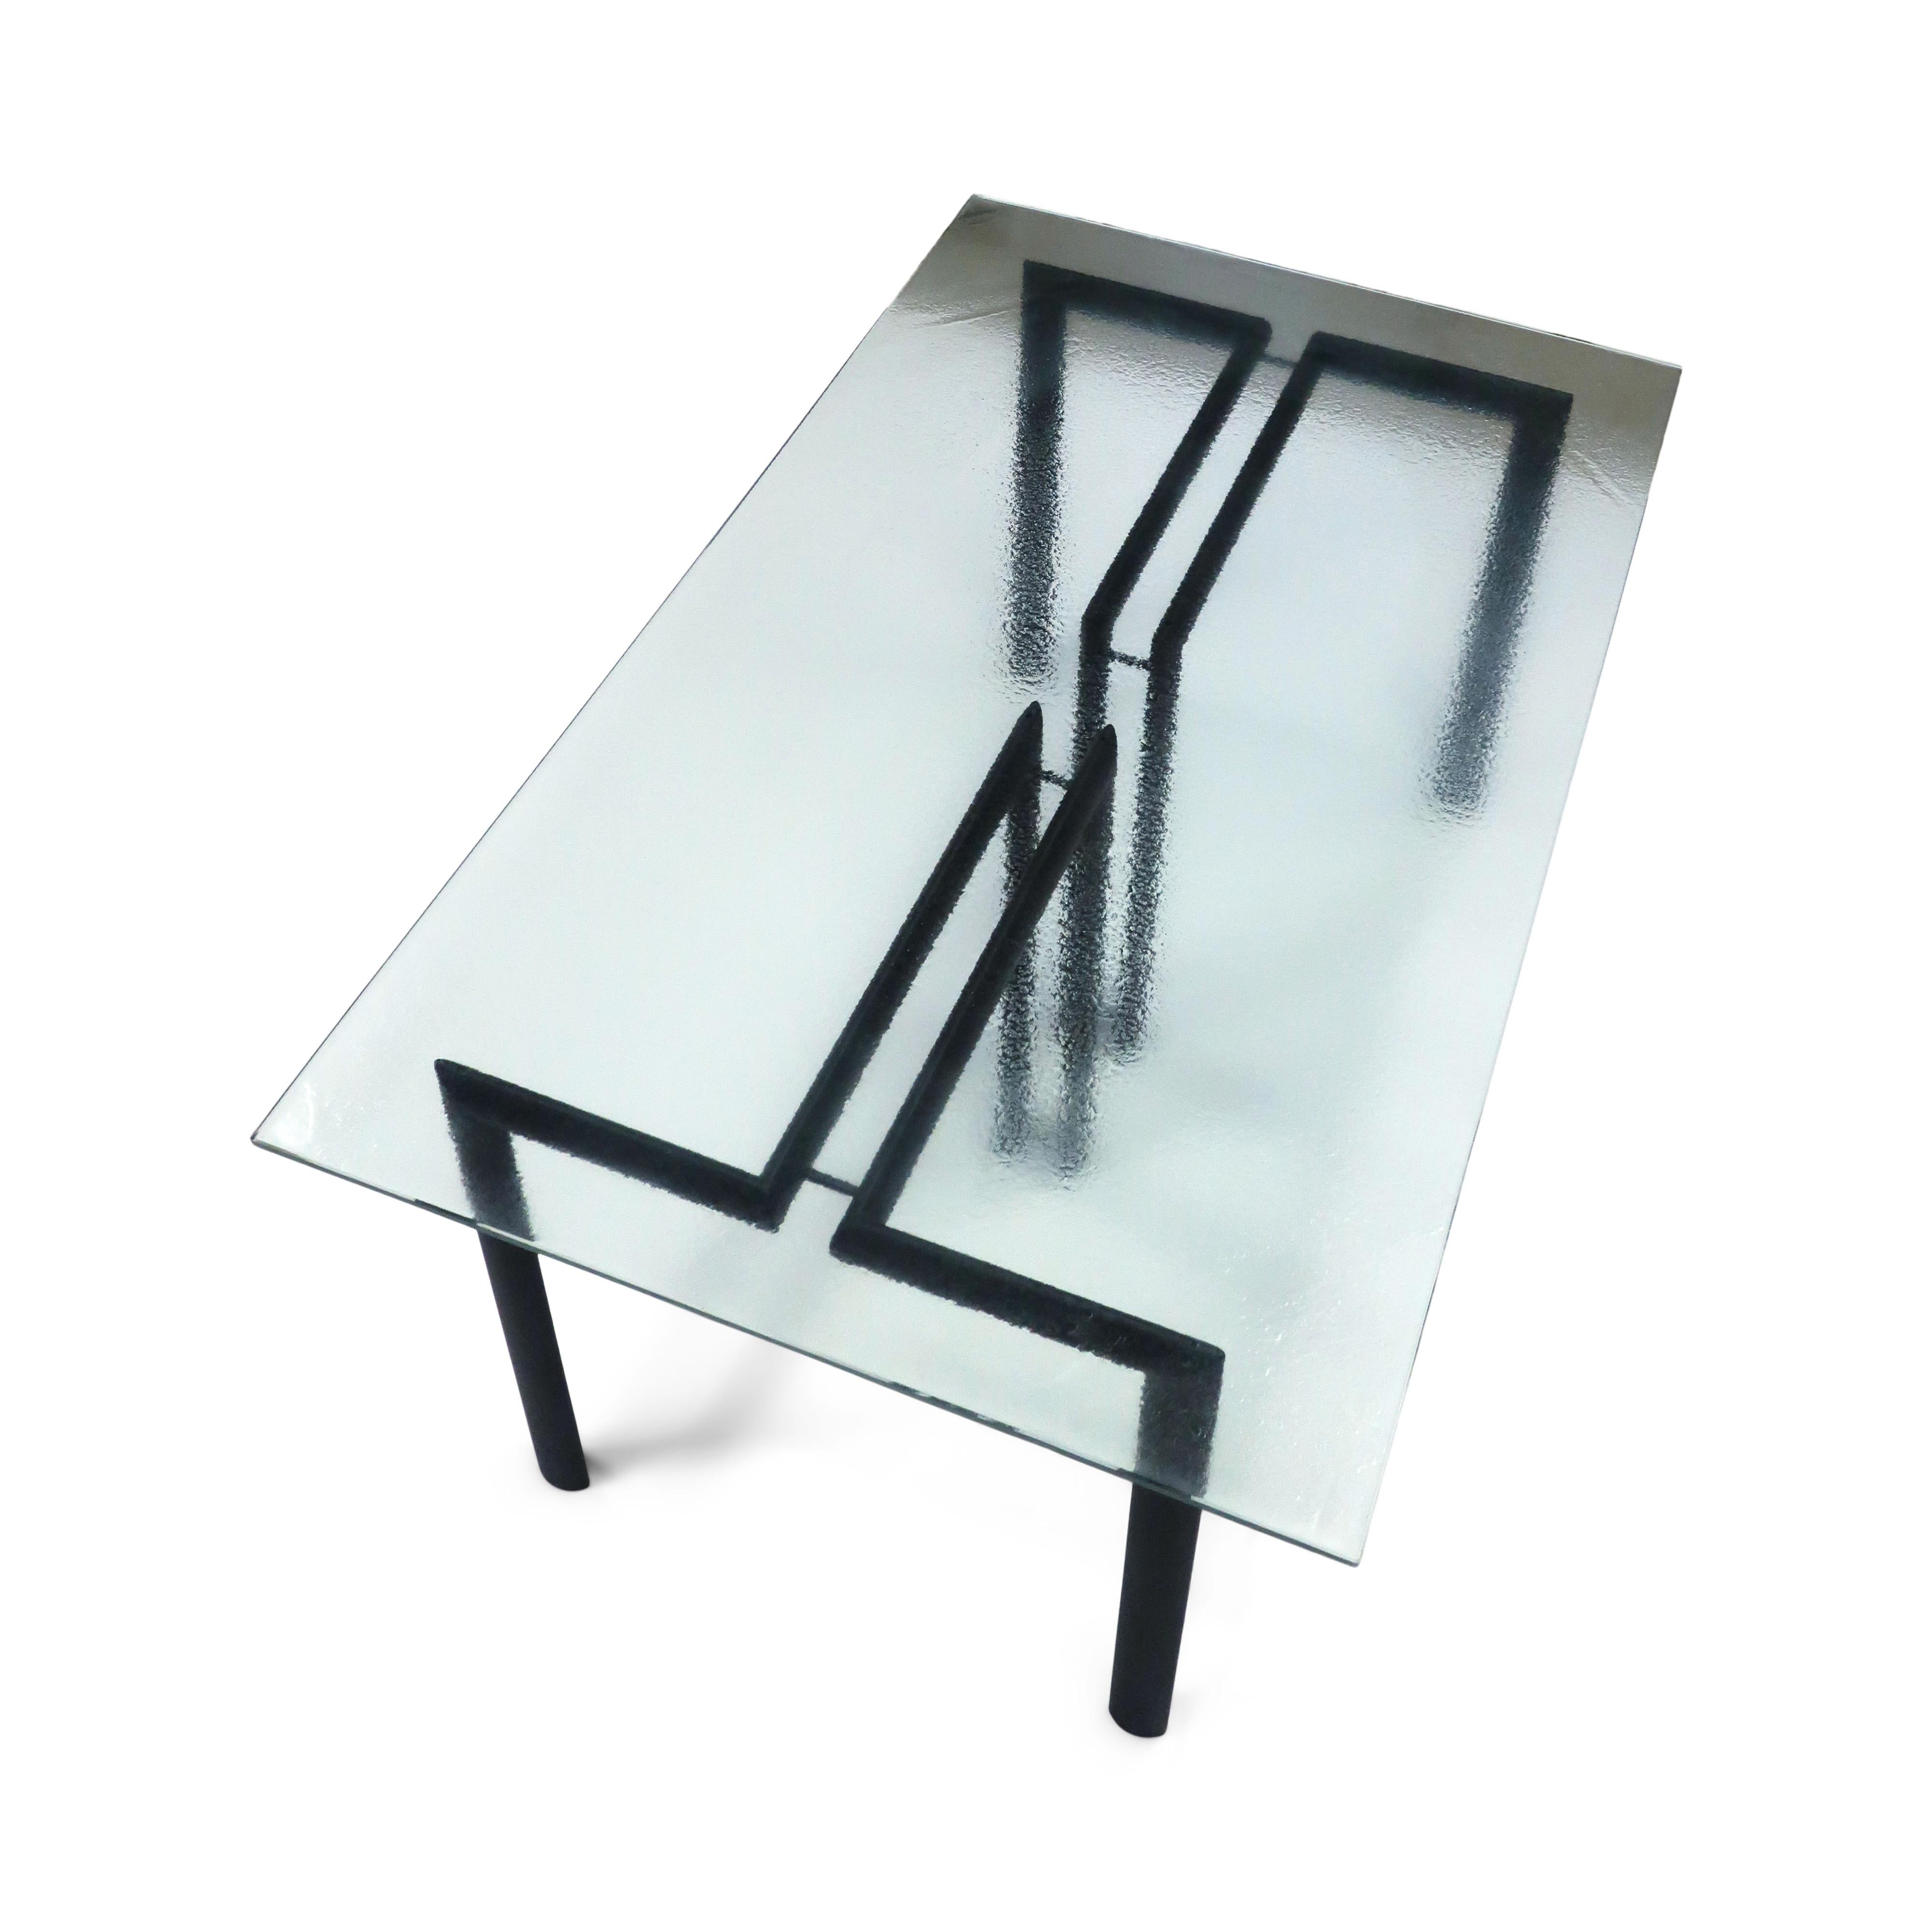 A beautiful 1980s Italian postmodern table designed by Giorgio Cattelan for Cidue. The table's base is designed with two matte black enamel metal pieces in a T-shape. The two piece base allows for different sized tops, making this a versatile table